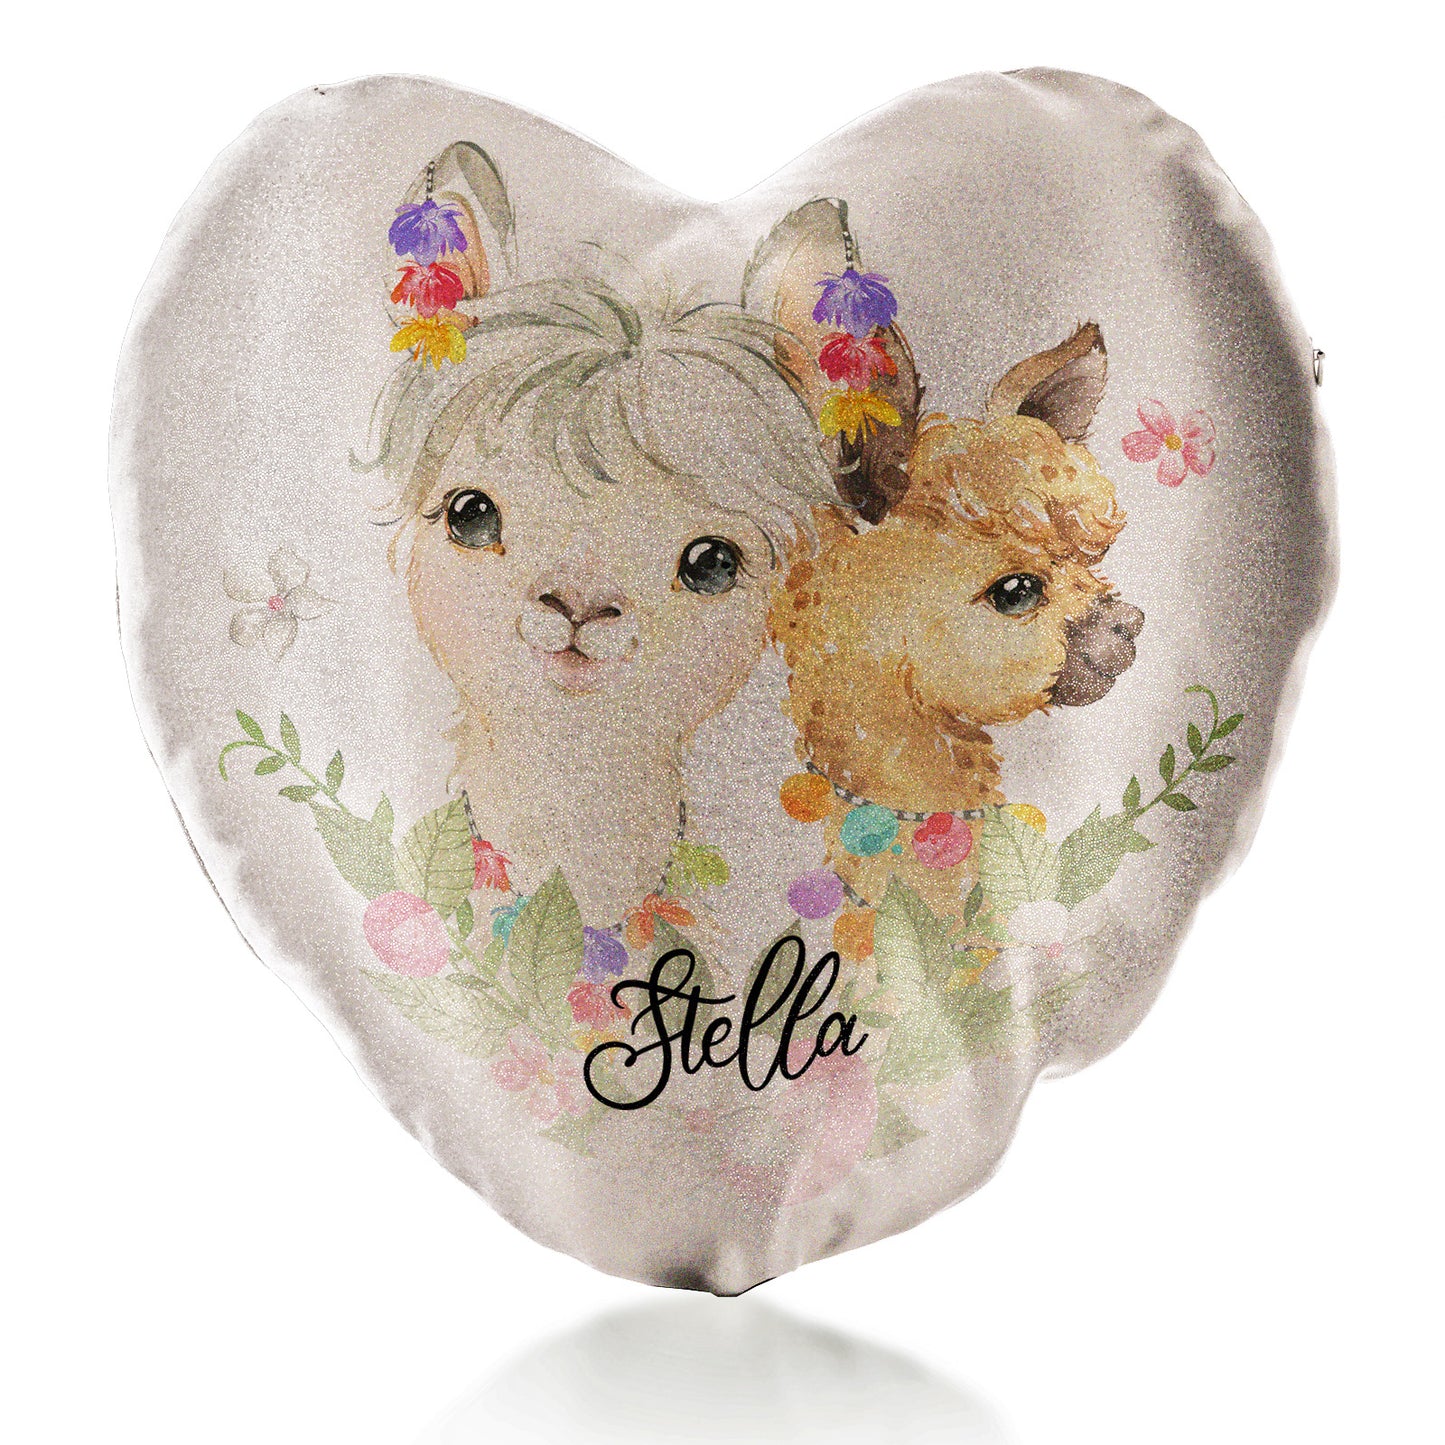 Personalised Glitter Heart Cushion with Alpacas Multicolour Baubles and Cute Text